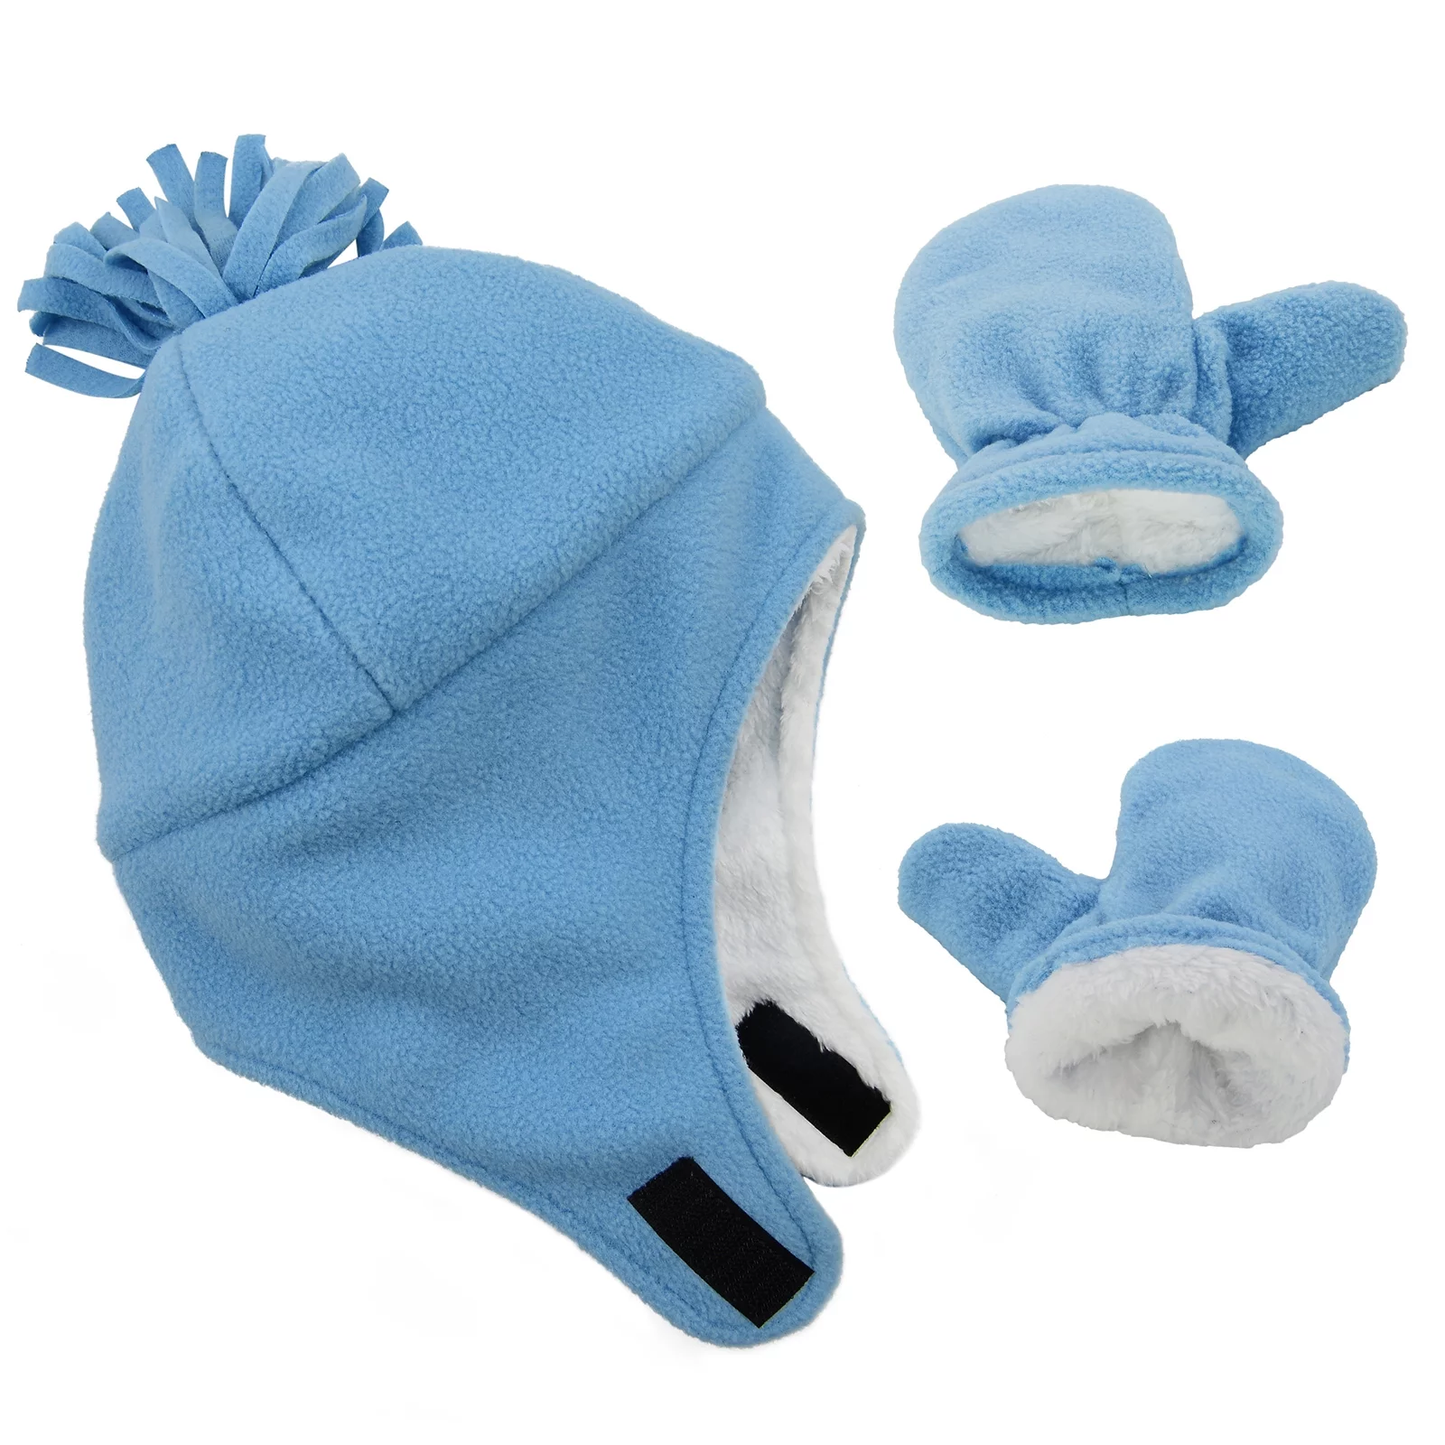 Baby Toddler Winter Hat and Glove Set Sherpa Lined Warm Fleece Earflap Beanie Hat ZB127